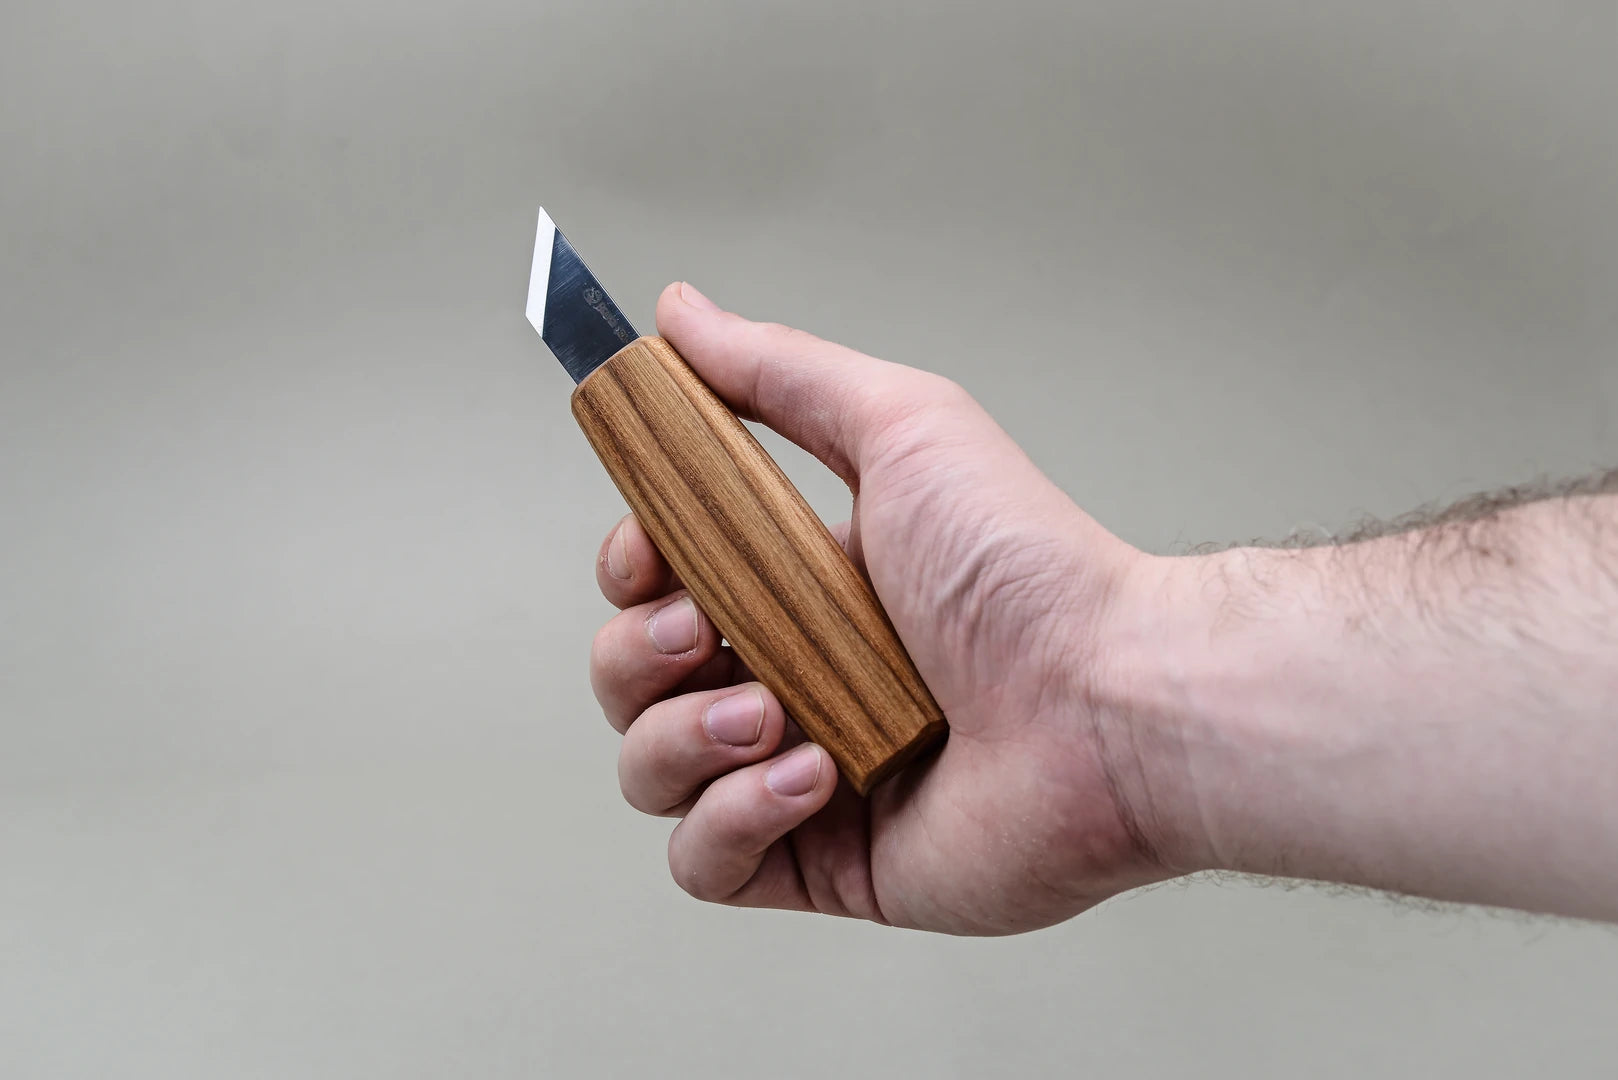 Knife Making - How to Make A Woodworking Marking Knife 